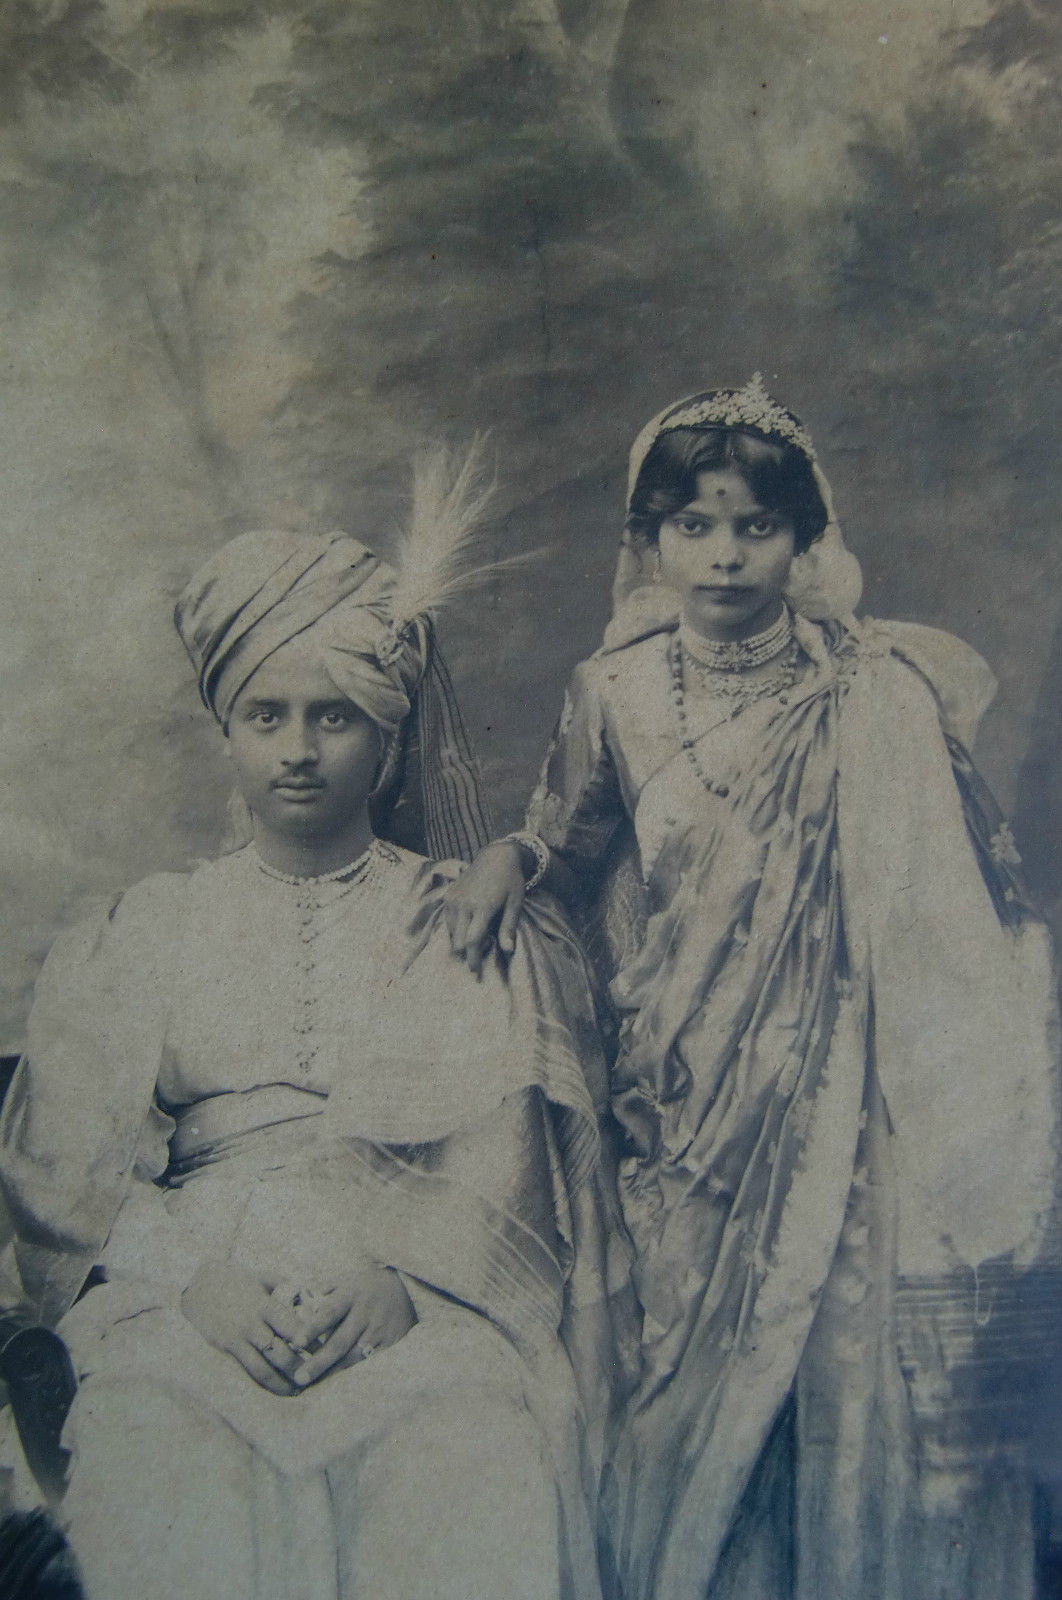 Photograph of a Newly Married Couple - Old Indian Photos1062 x 1600